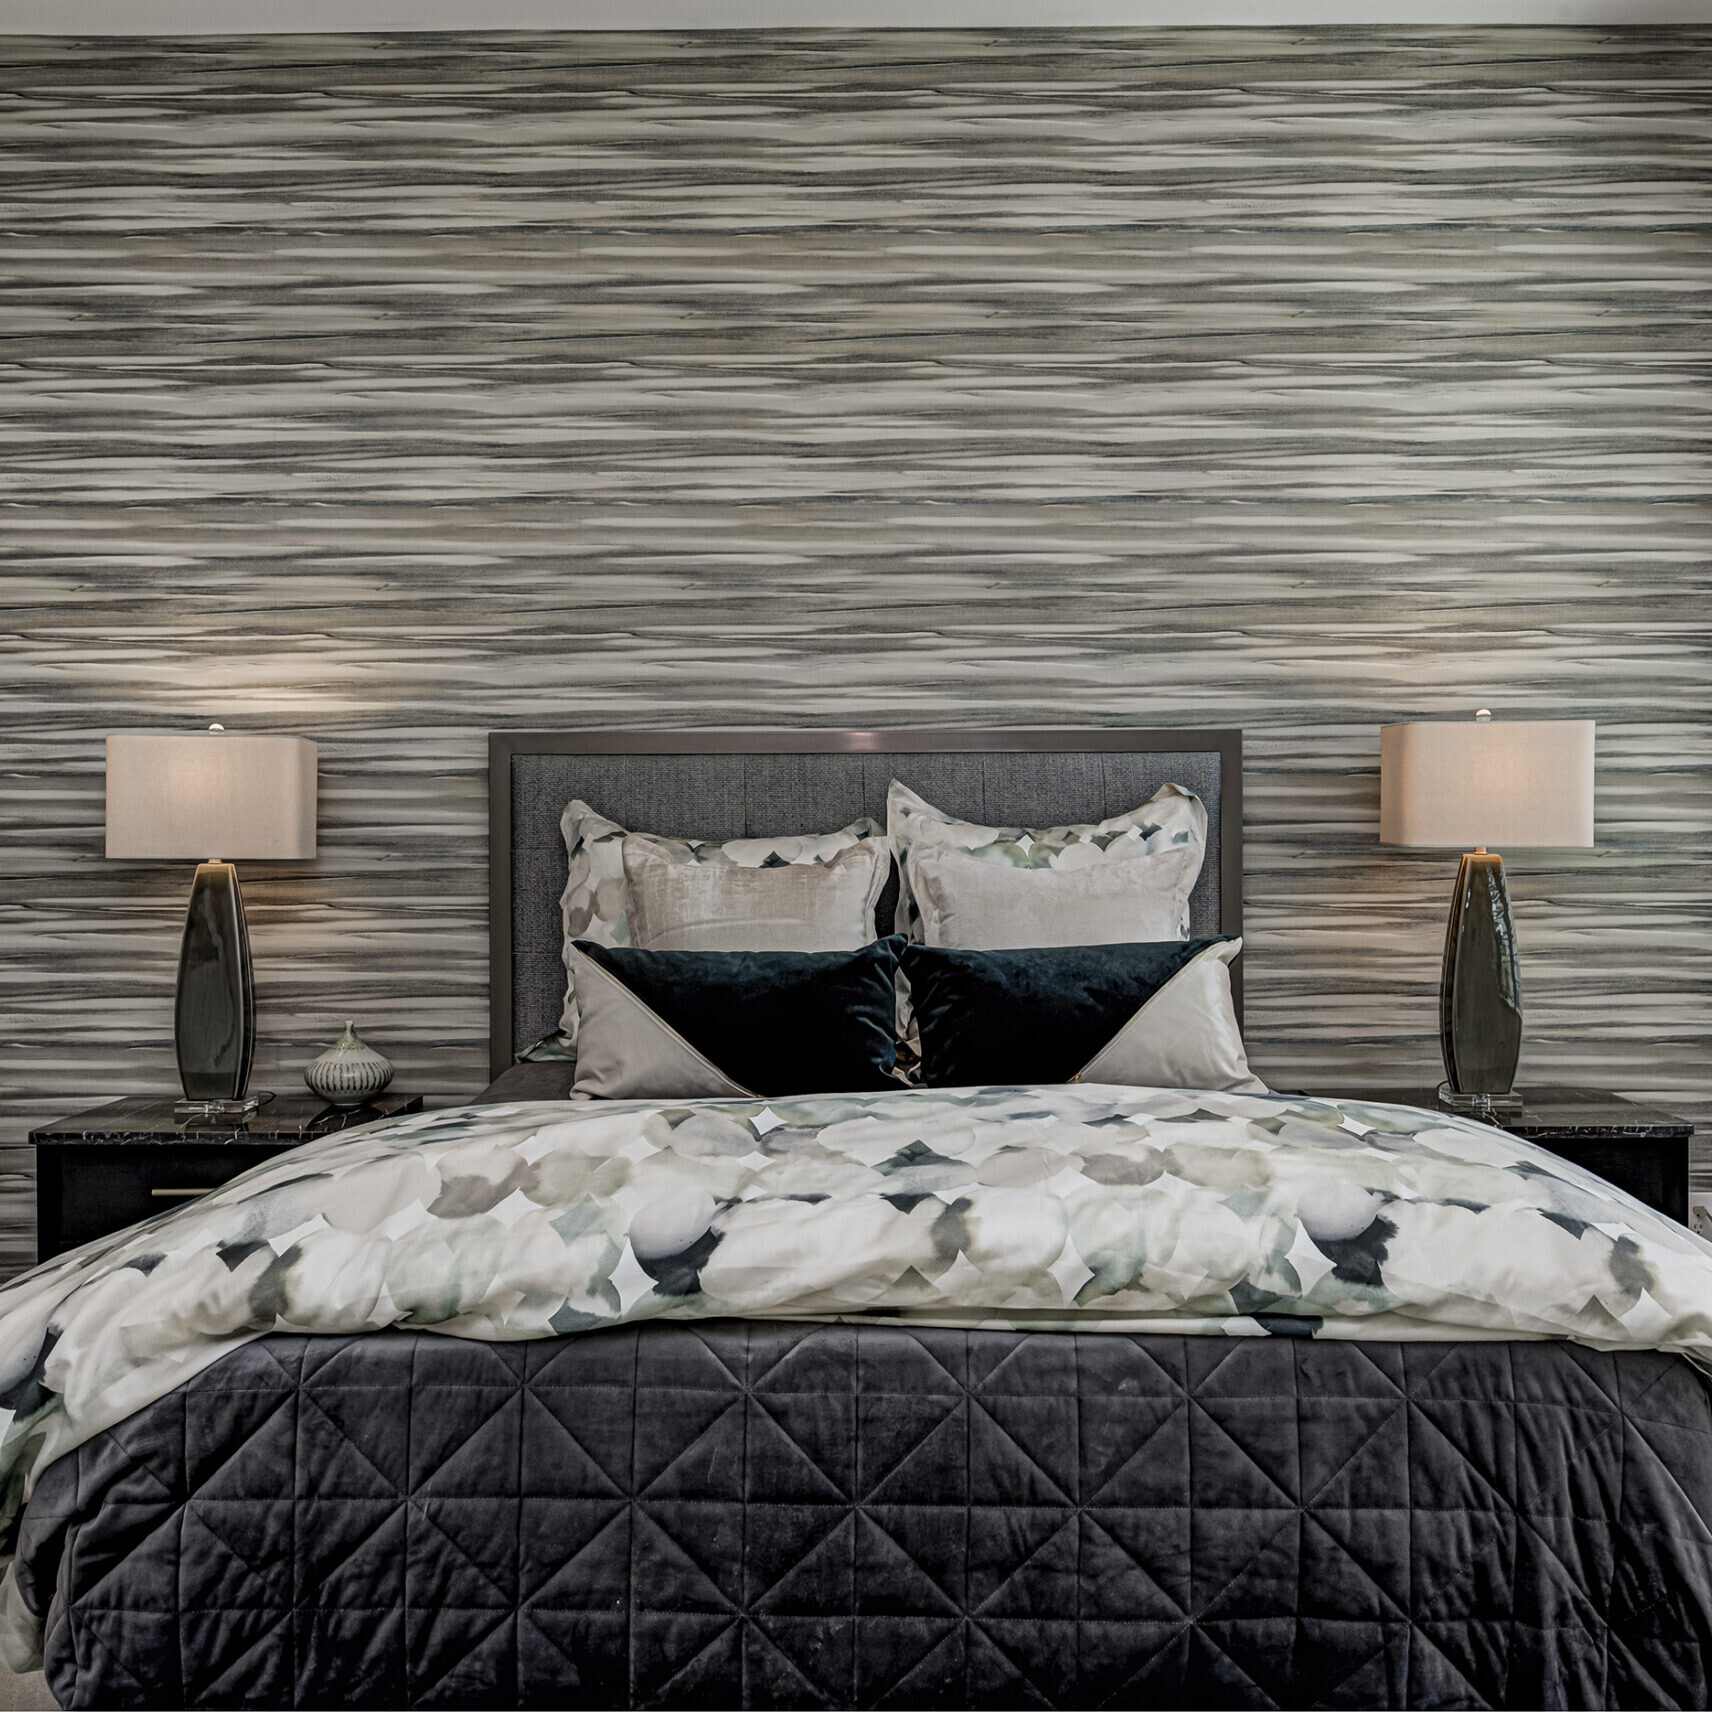 A bed in a bedroom with black and white striped wallpaper.